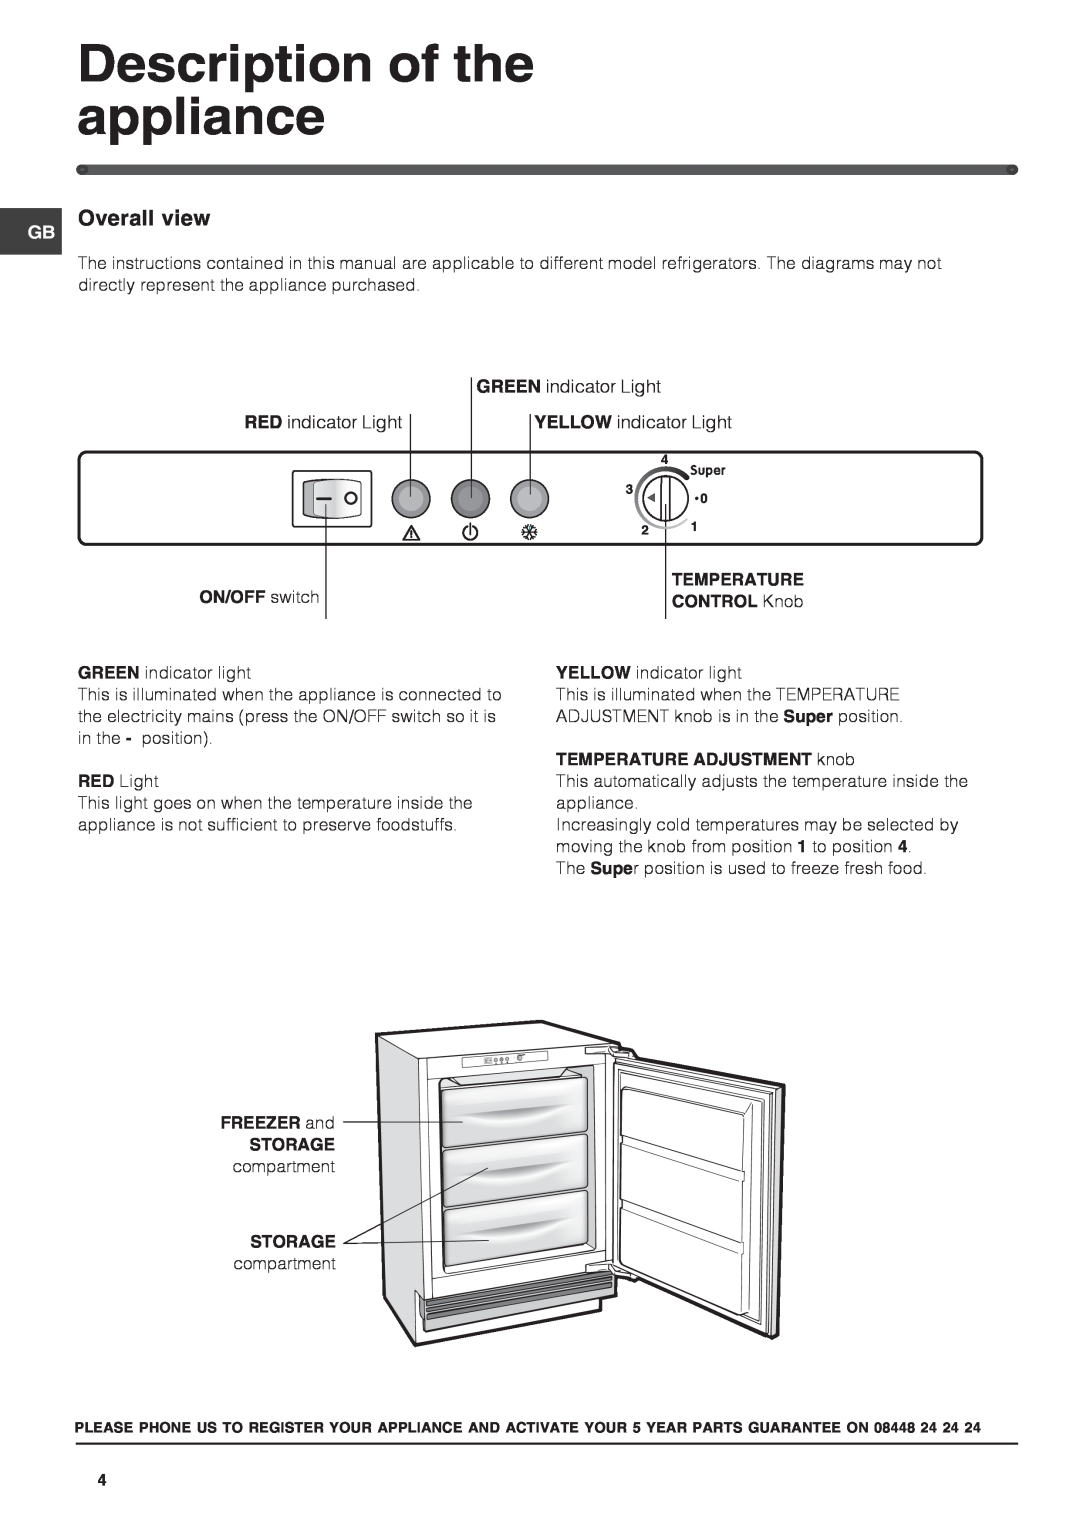 Hotpoint HUZ1221 Description of the appliance, Overall view, ON/OFF switch, Temperature, CONTROL Knob 